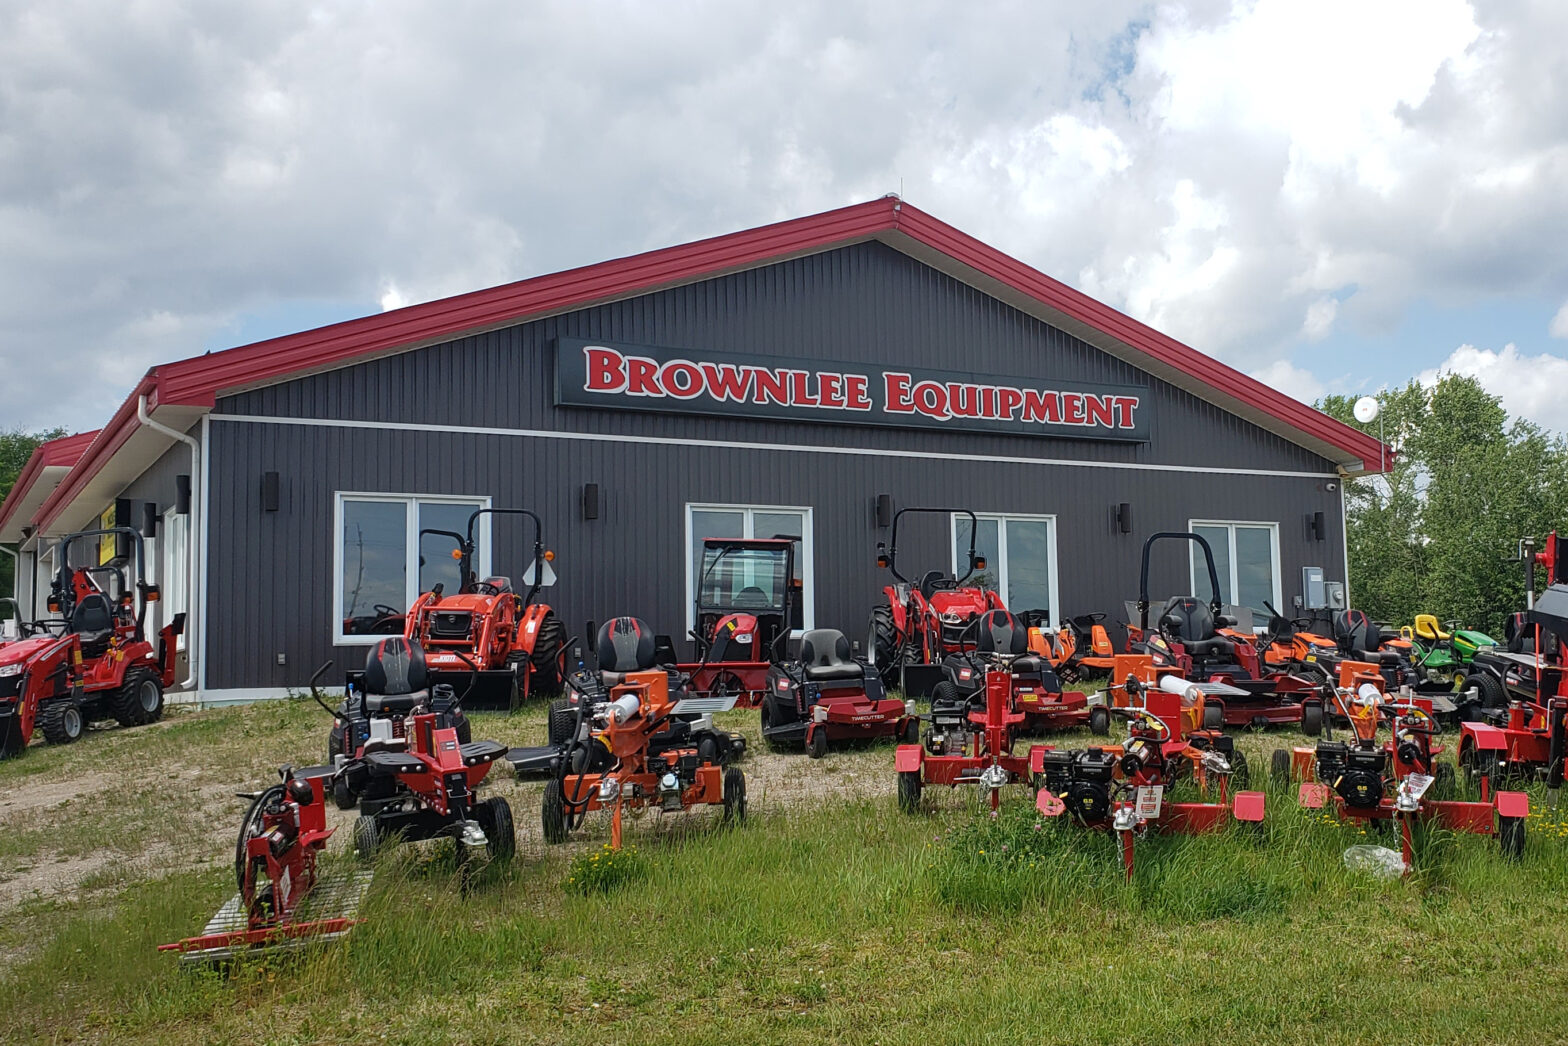 A building reading "Brownlee Equipment" with red tractors parked out front.